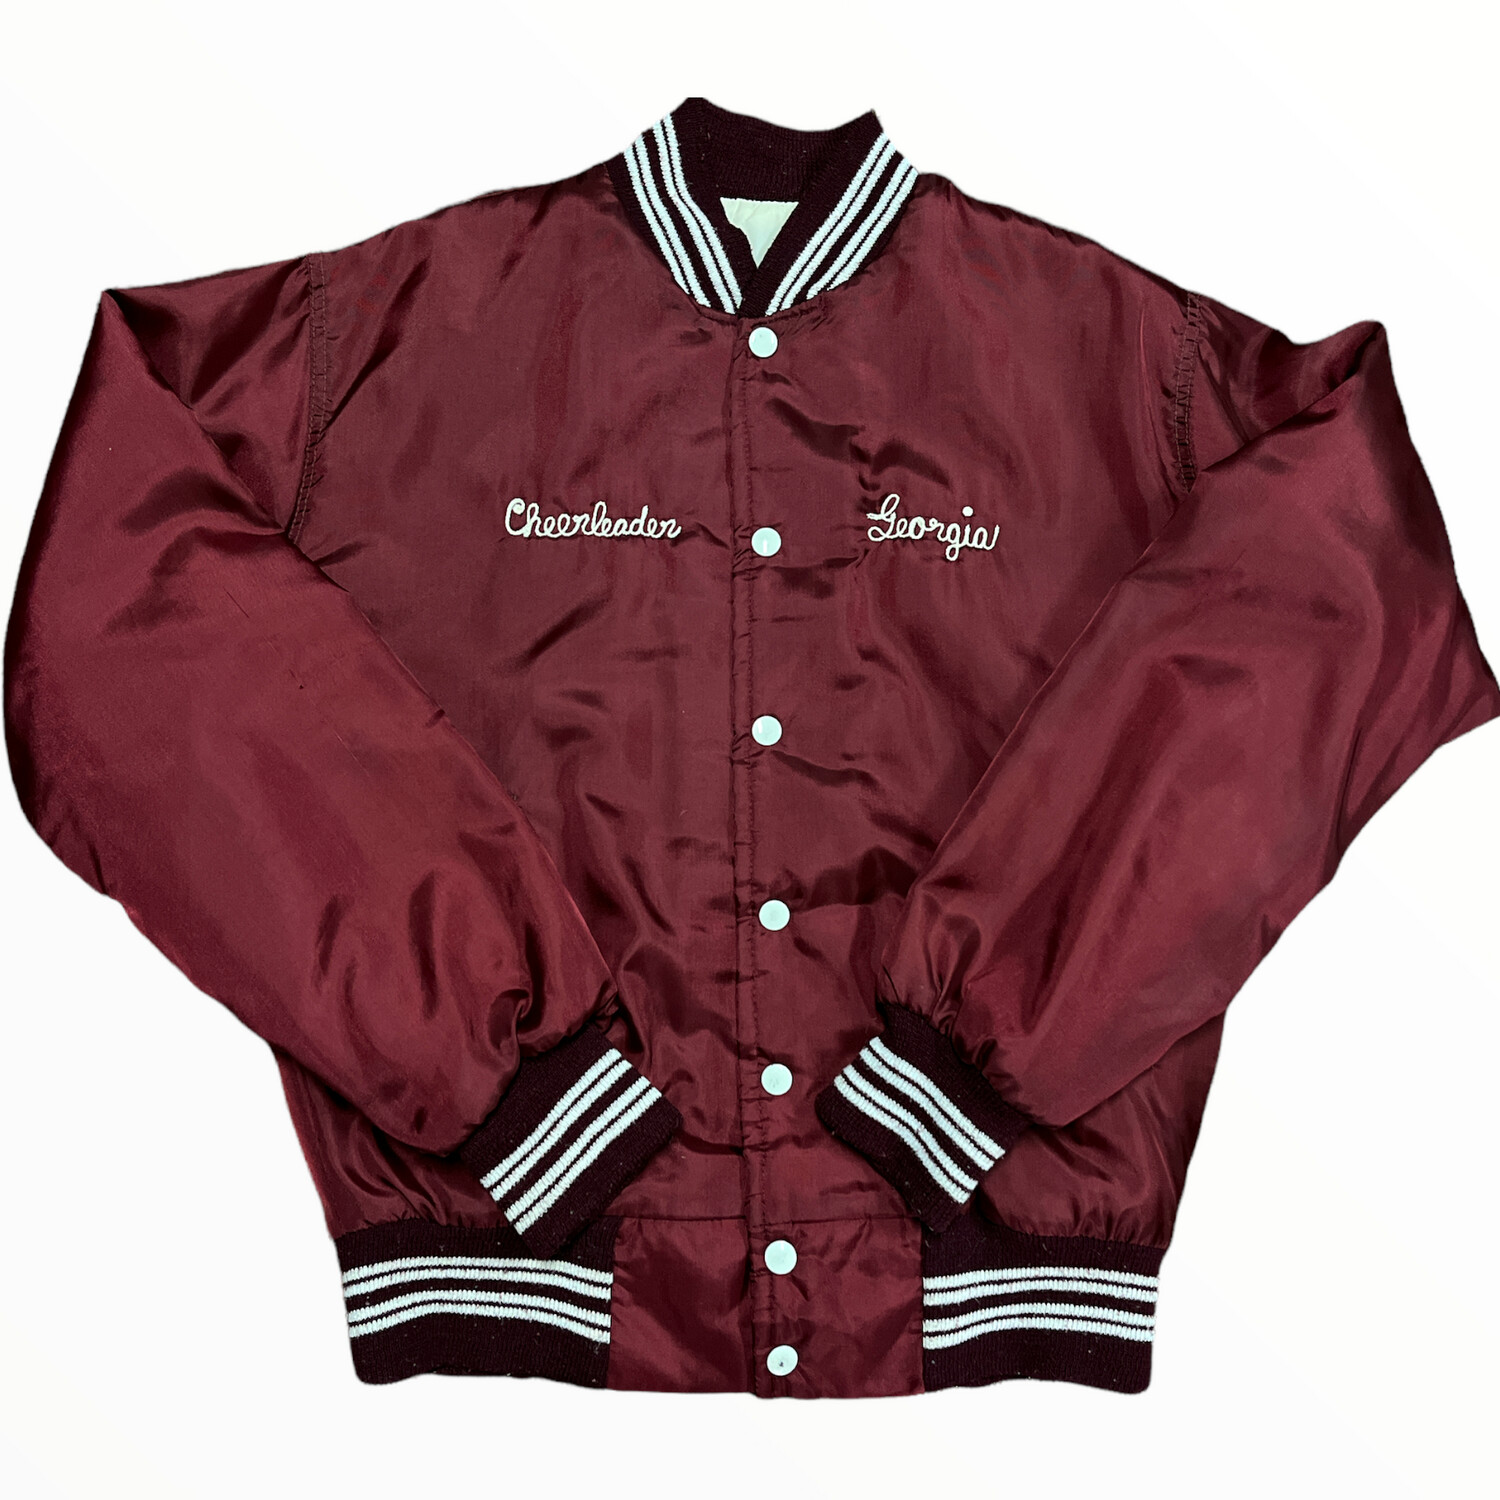 Vintage IUP Georgia Cheerleader Varsity Button Up Jacket, Size: Small, Color: Red, Style: Bomber